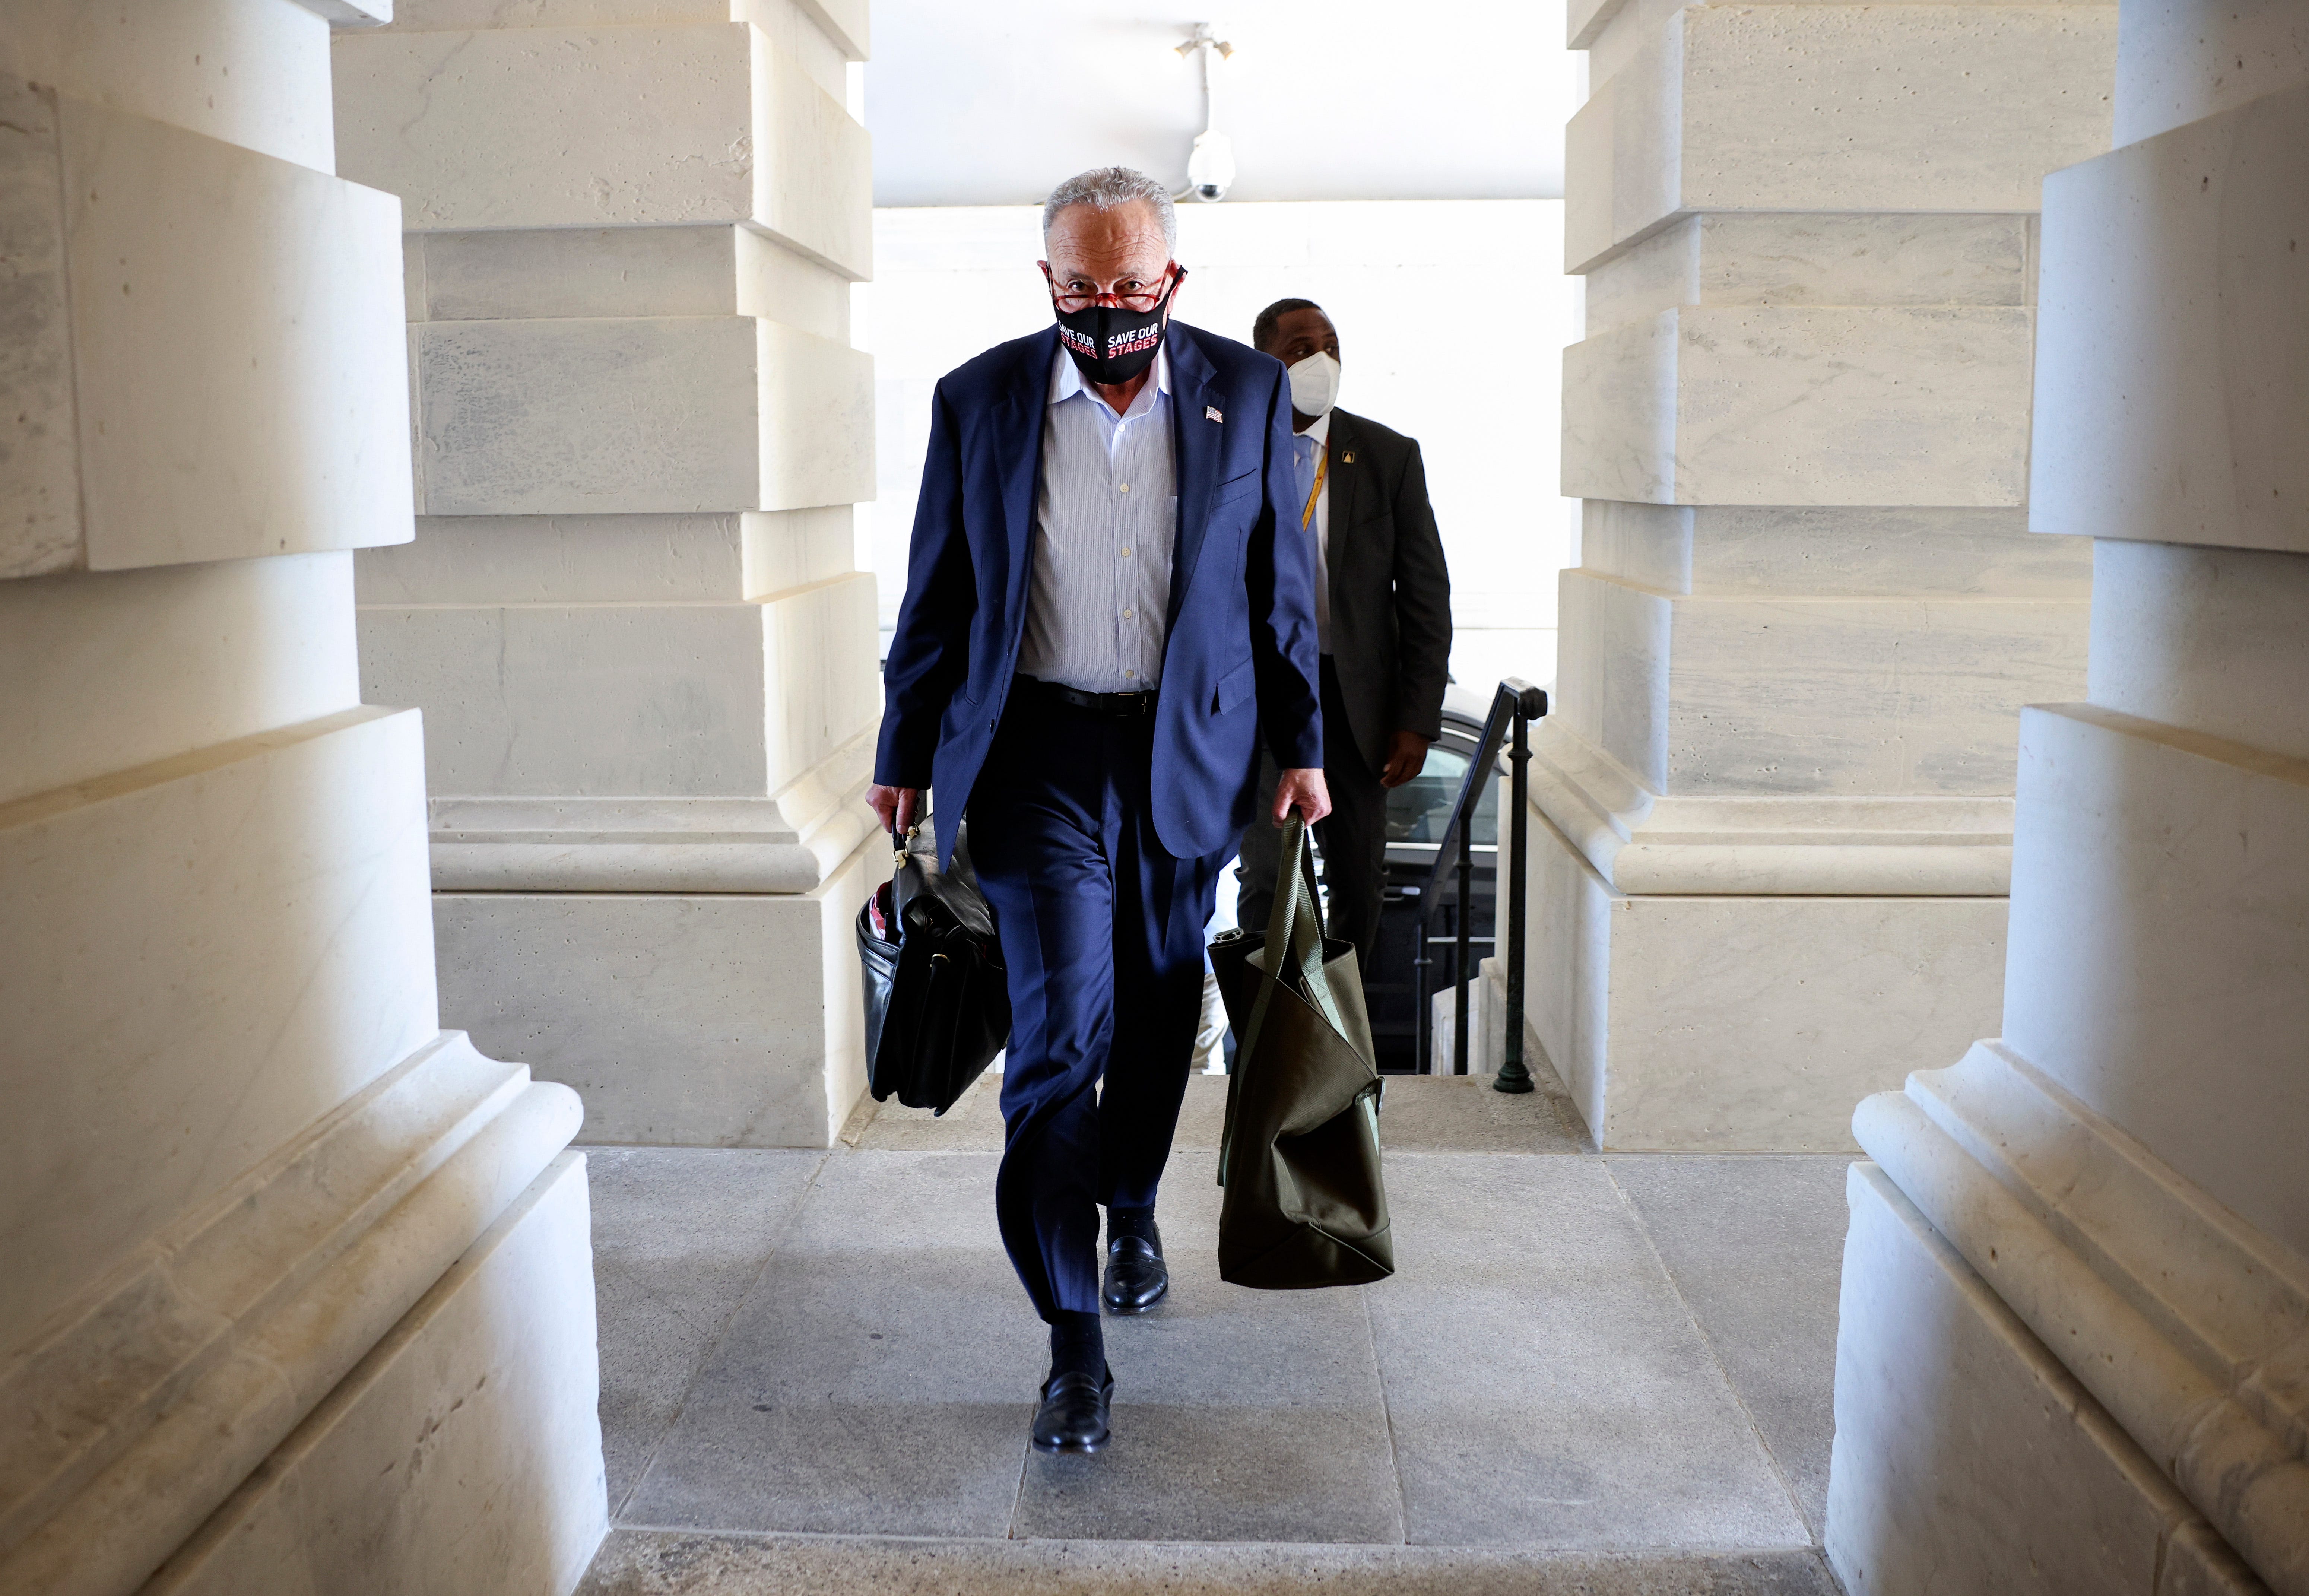 Senate Majority Leader Charles Schumer, D-N.Y., arrives at the U.S. Capitol on Sept. 27, 2021, in Washington. The Senate is working on passing a funding bill for the U.S. government and an increase to the debt ceiling before a possible government shutdown at the end of the week.